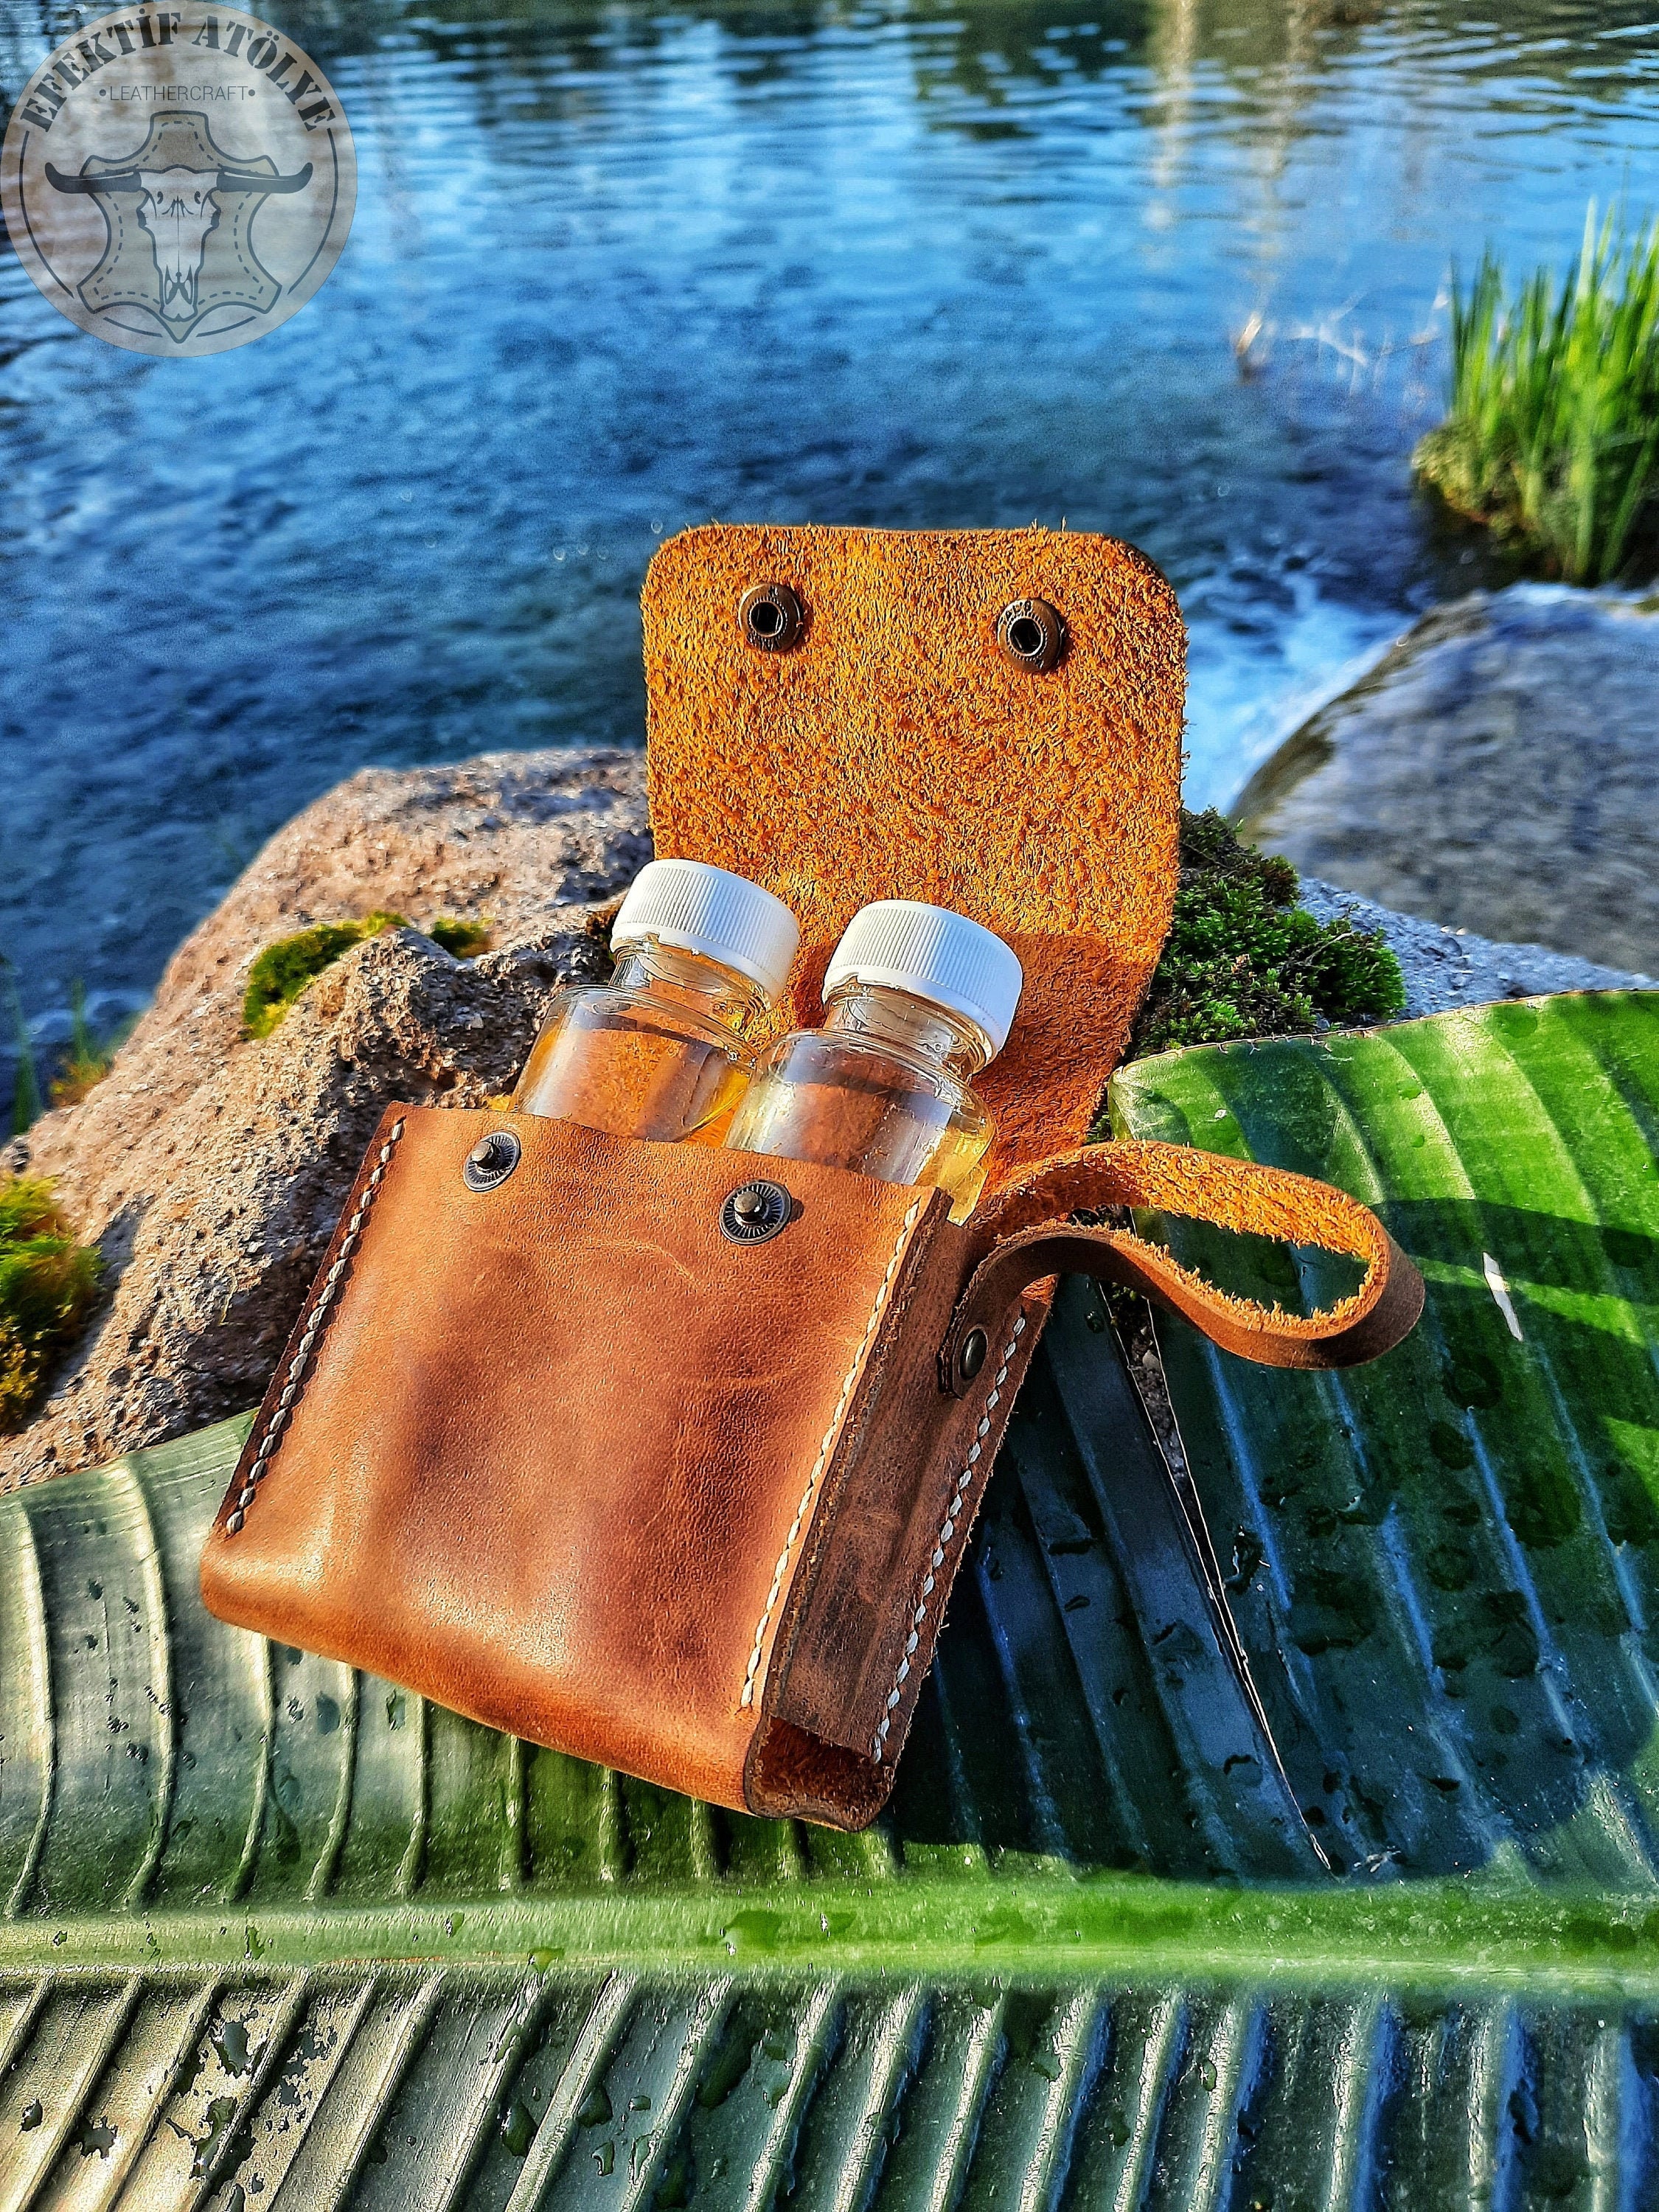 Buy Leather Oil and Vinegar Bottle Set, Handmade Camping Utensils, Four  Jars & Leather Cover, Personalized Leather Travel Kitchen Tools Online in  India 